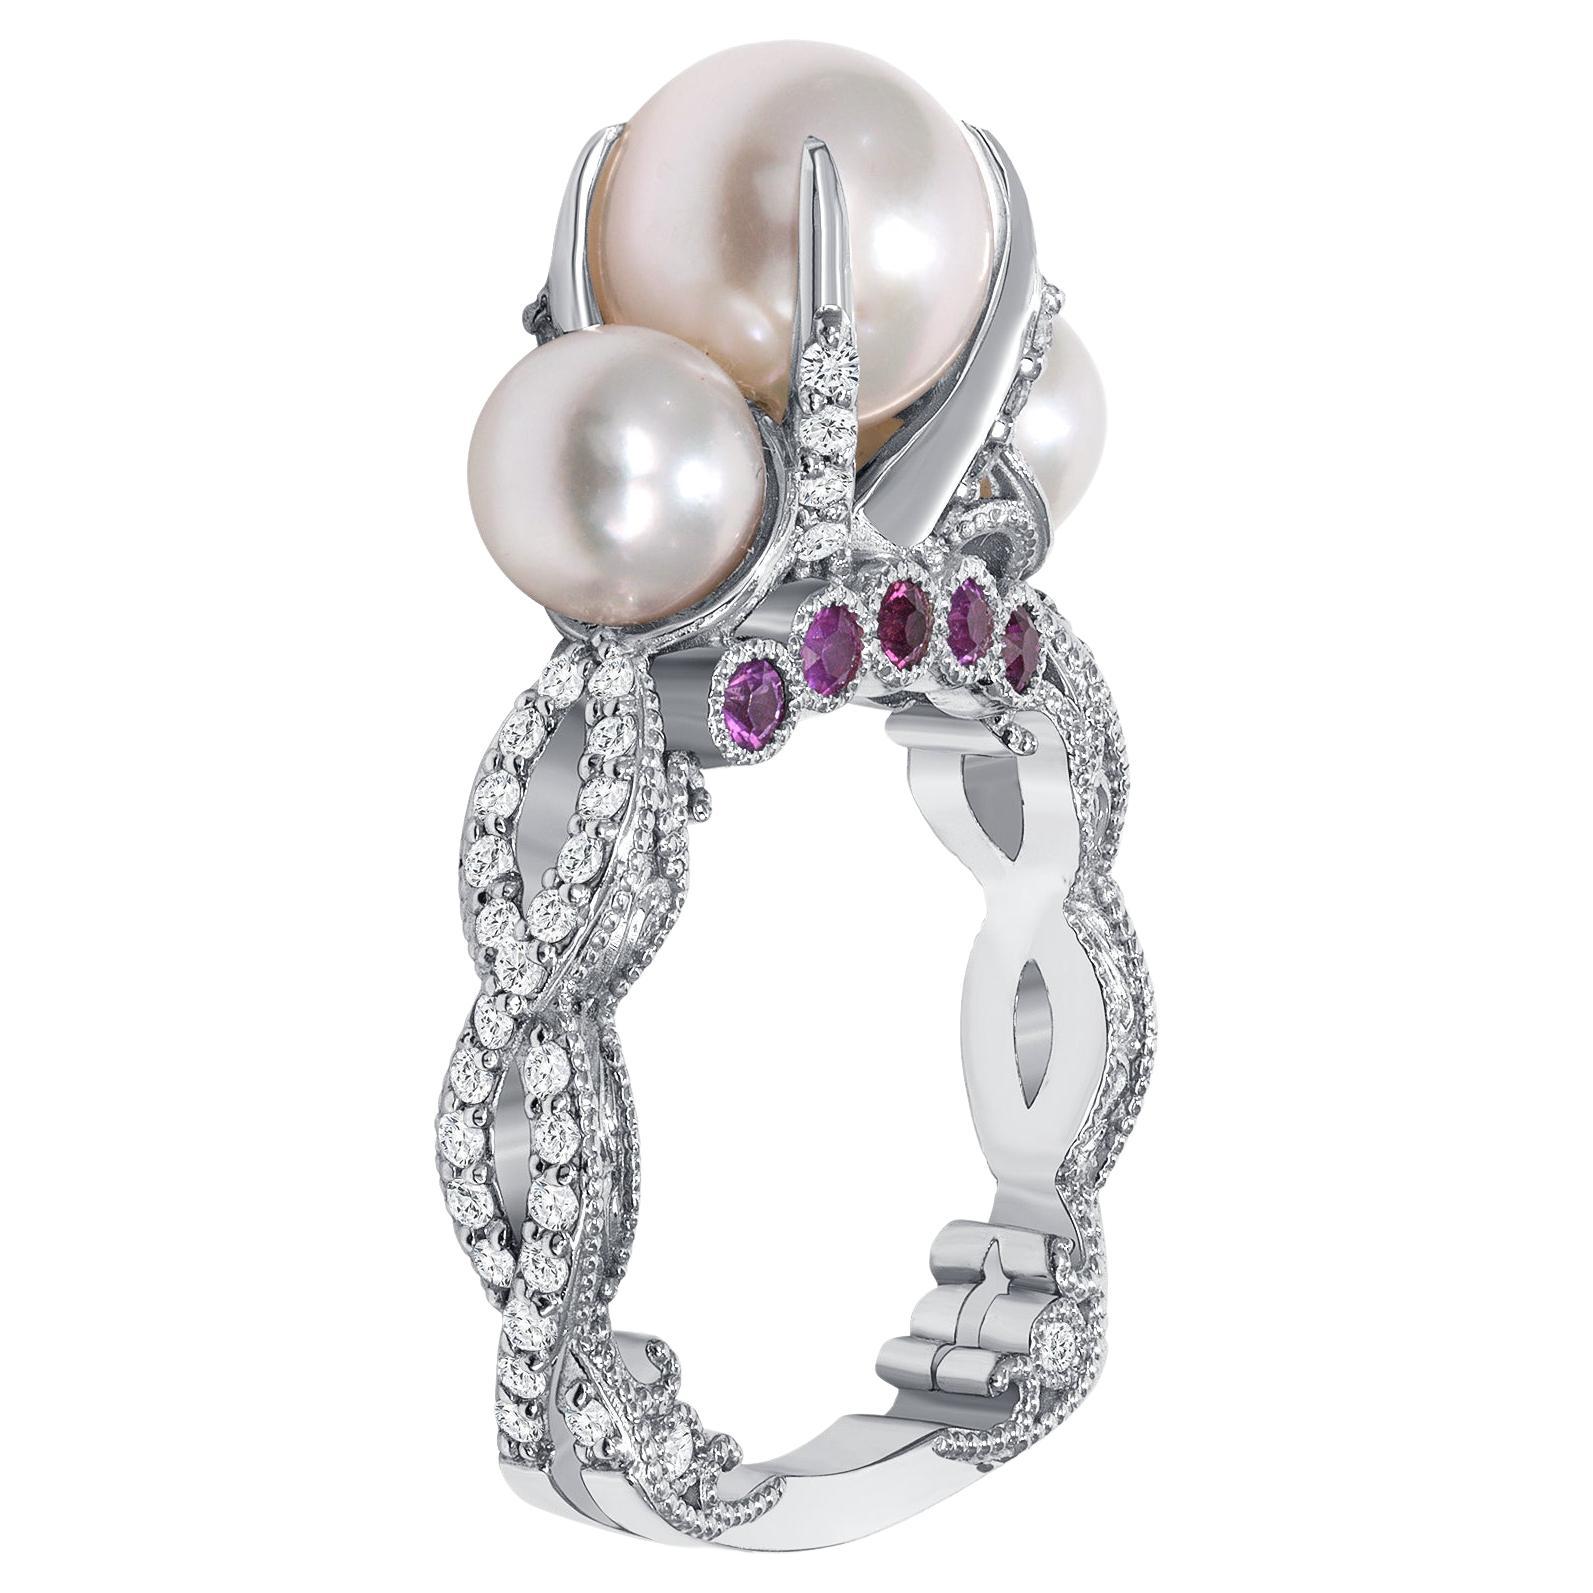 Akoya 9 Millimeter Pearl, Diamond, Pink Sapphire, and White Gold Cocktail Ring